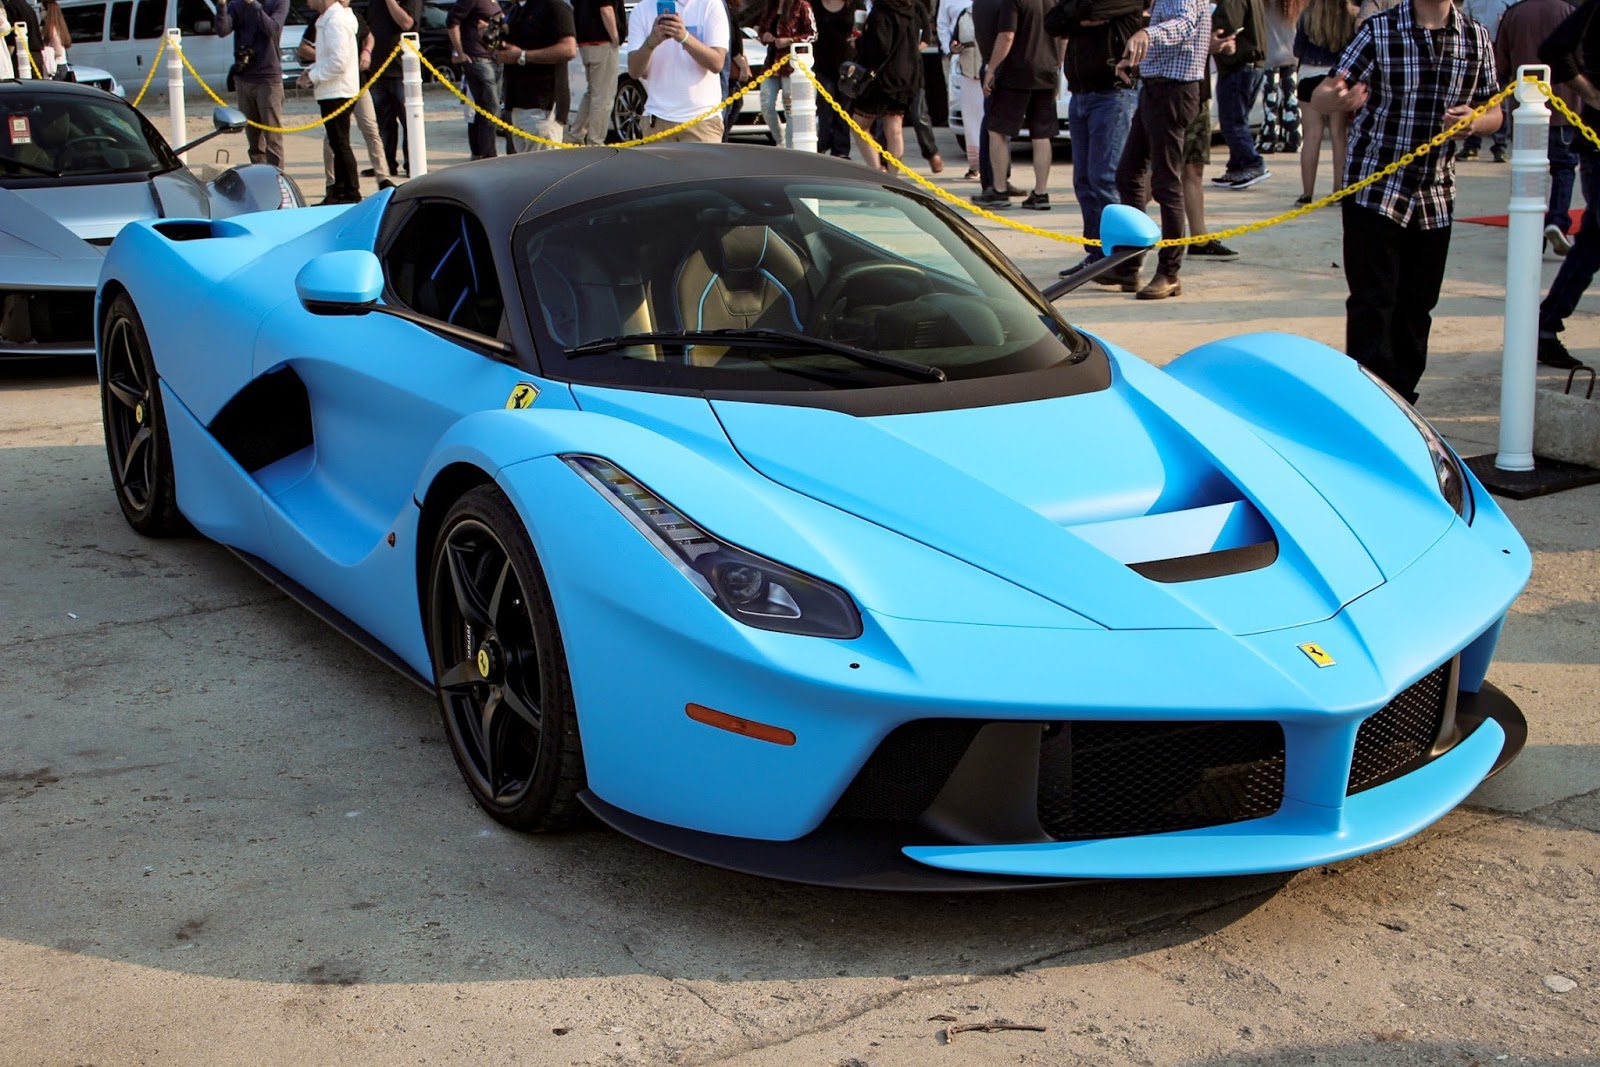 FrenchCarsnnection: All the most incredible Ferrari LaFerrari